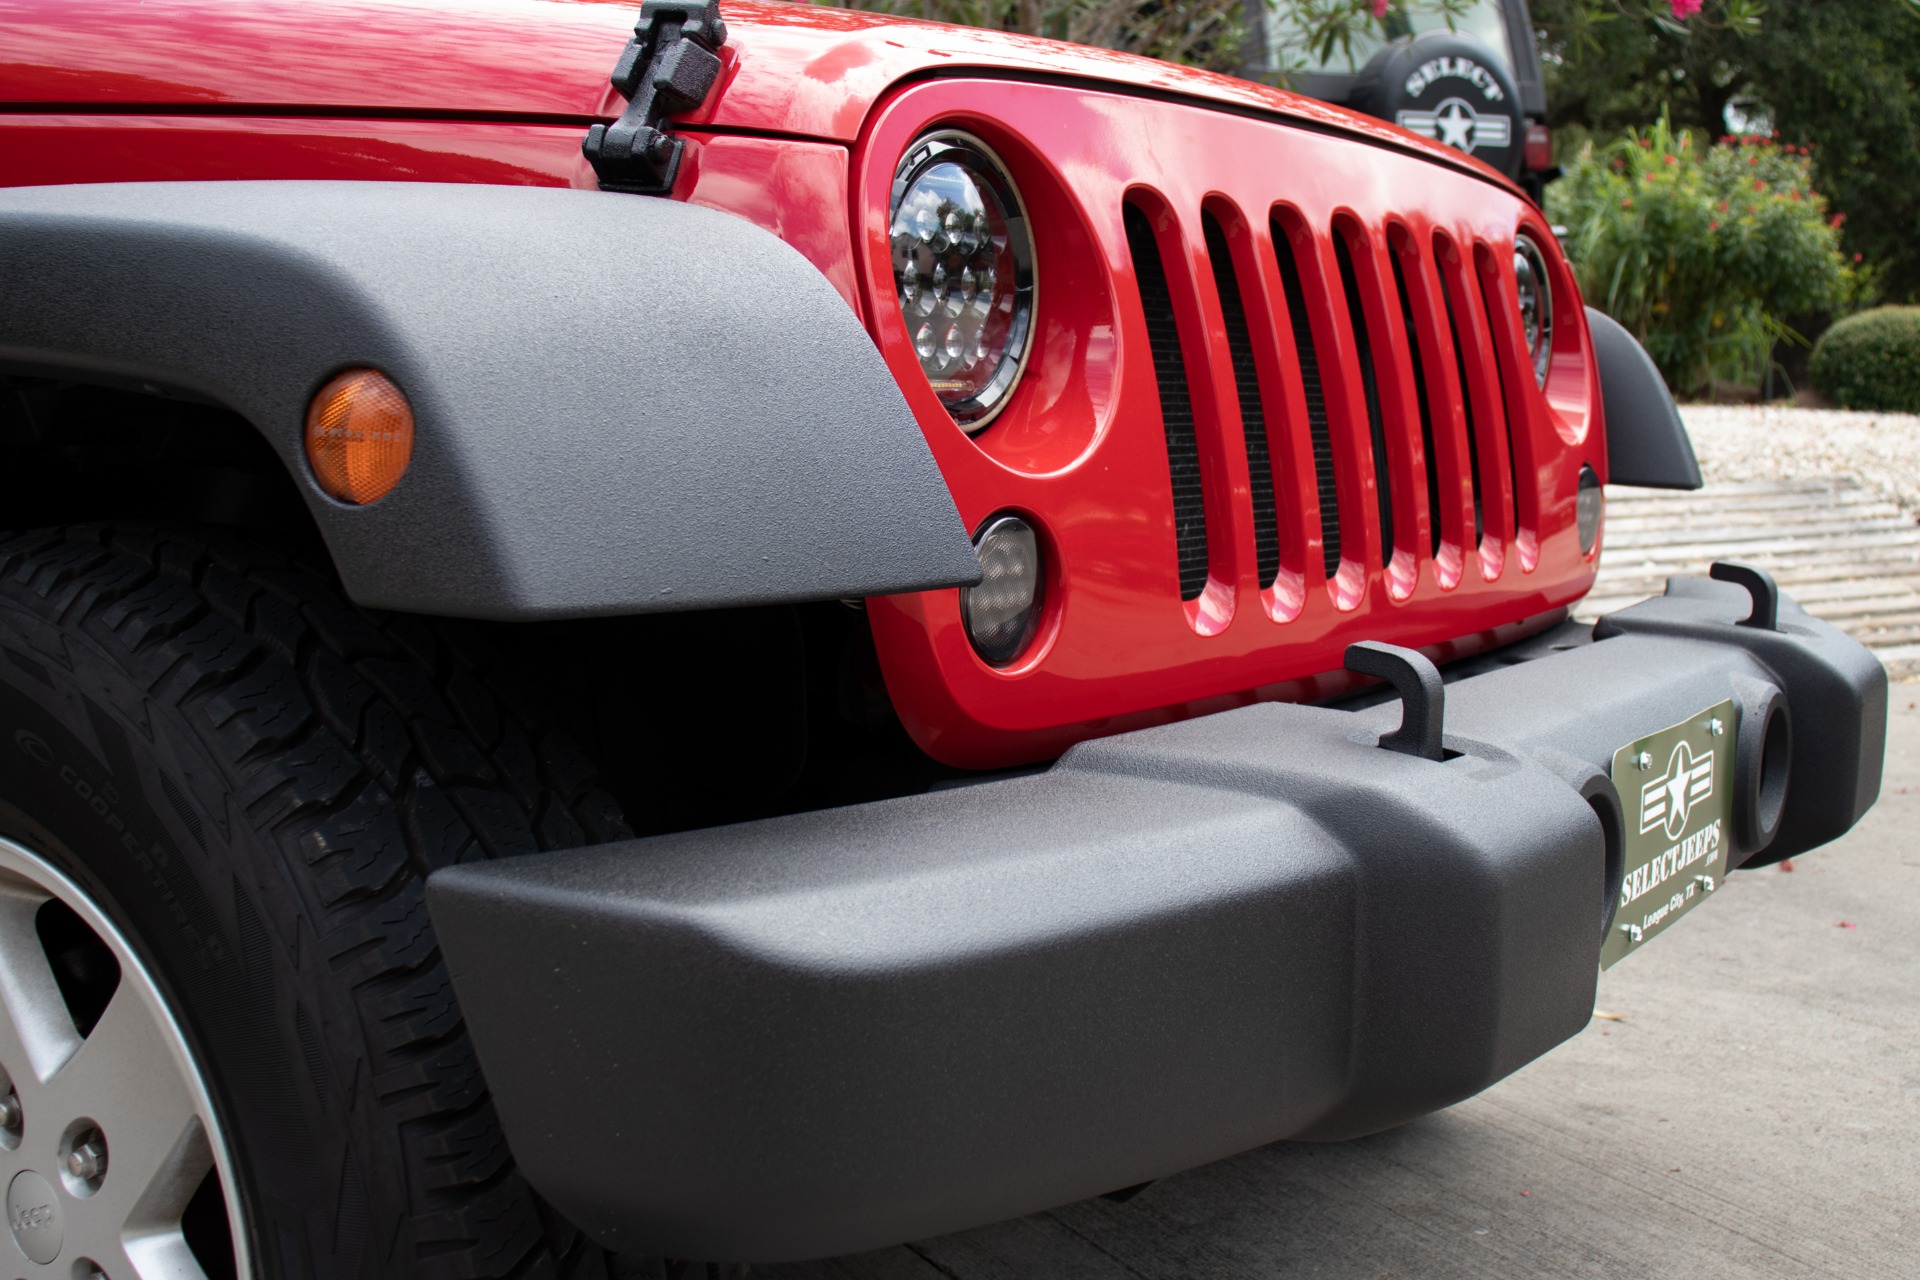 Used 2008 Jeep Wrangler Unlimited X For Sale 16 995